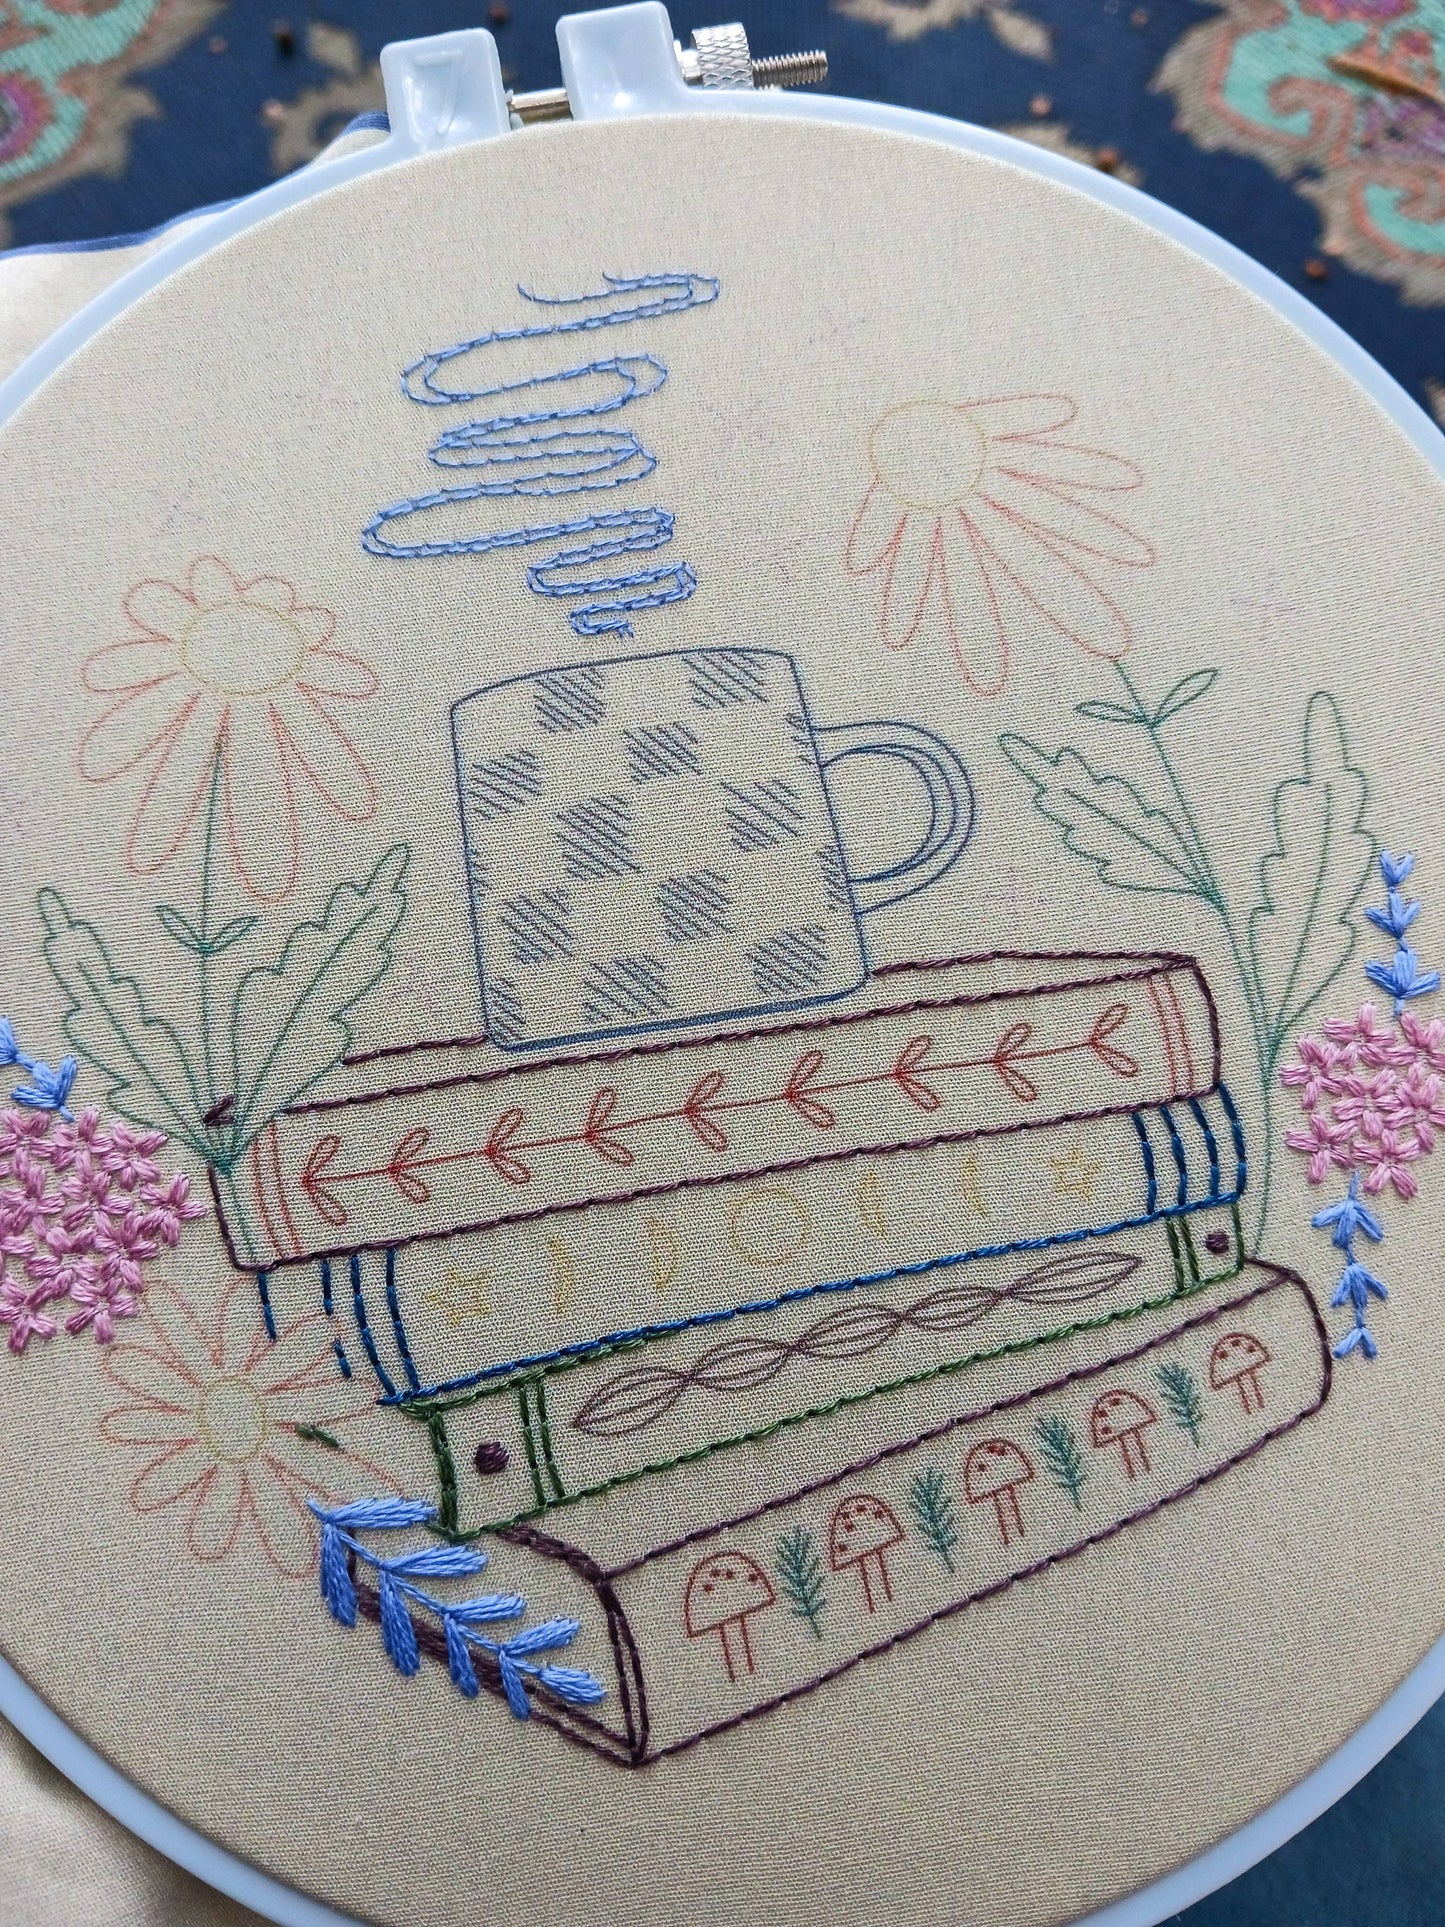 Book Nook - Cozyblue Handmade Embroidery Kit